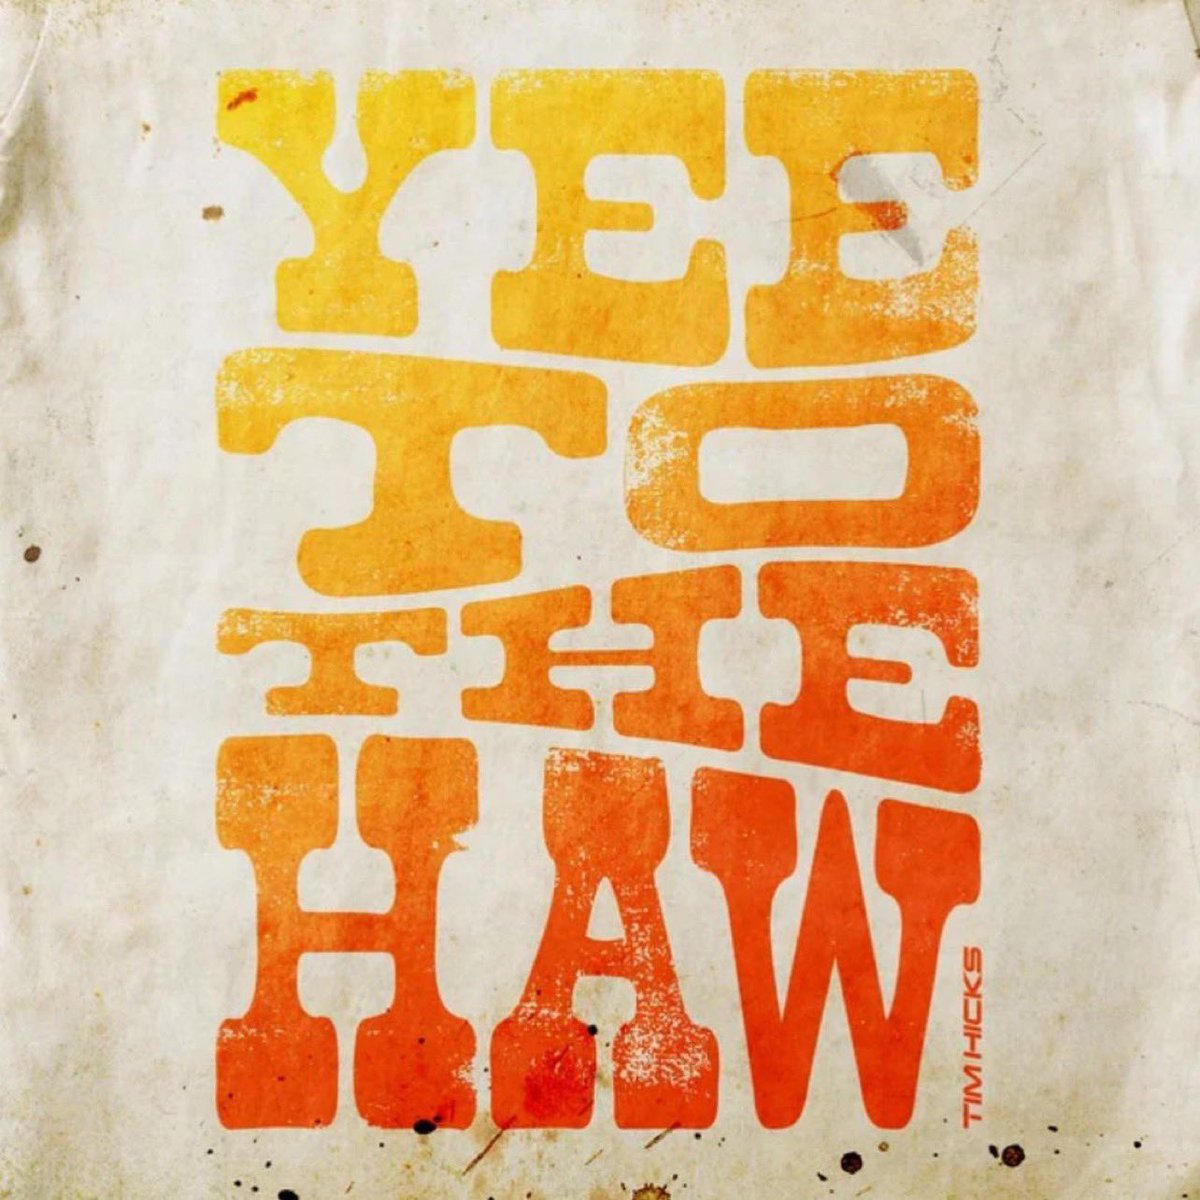 New @timhicksmusic #YeeToTheHaw co-wrote with @philbartonmusic is available now! 🤠

#newmusicfriday #countrymusic